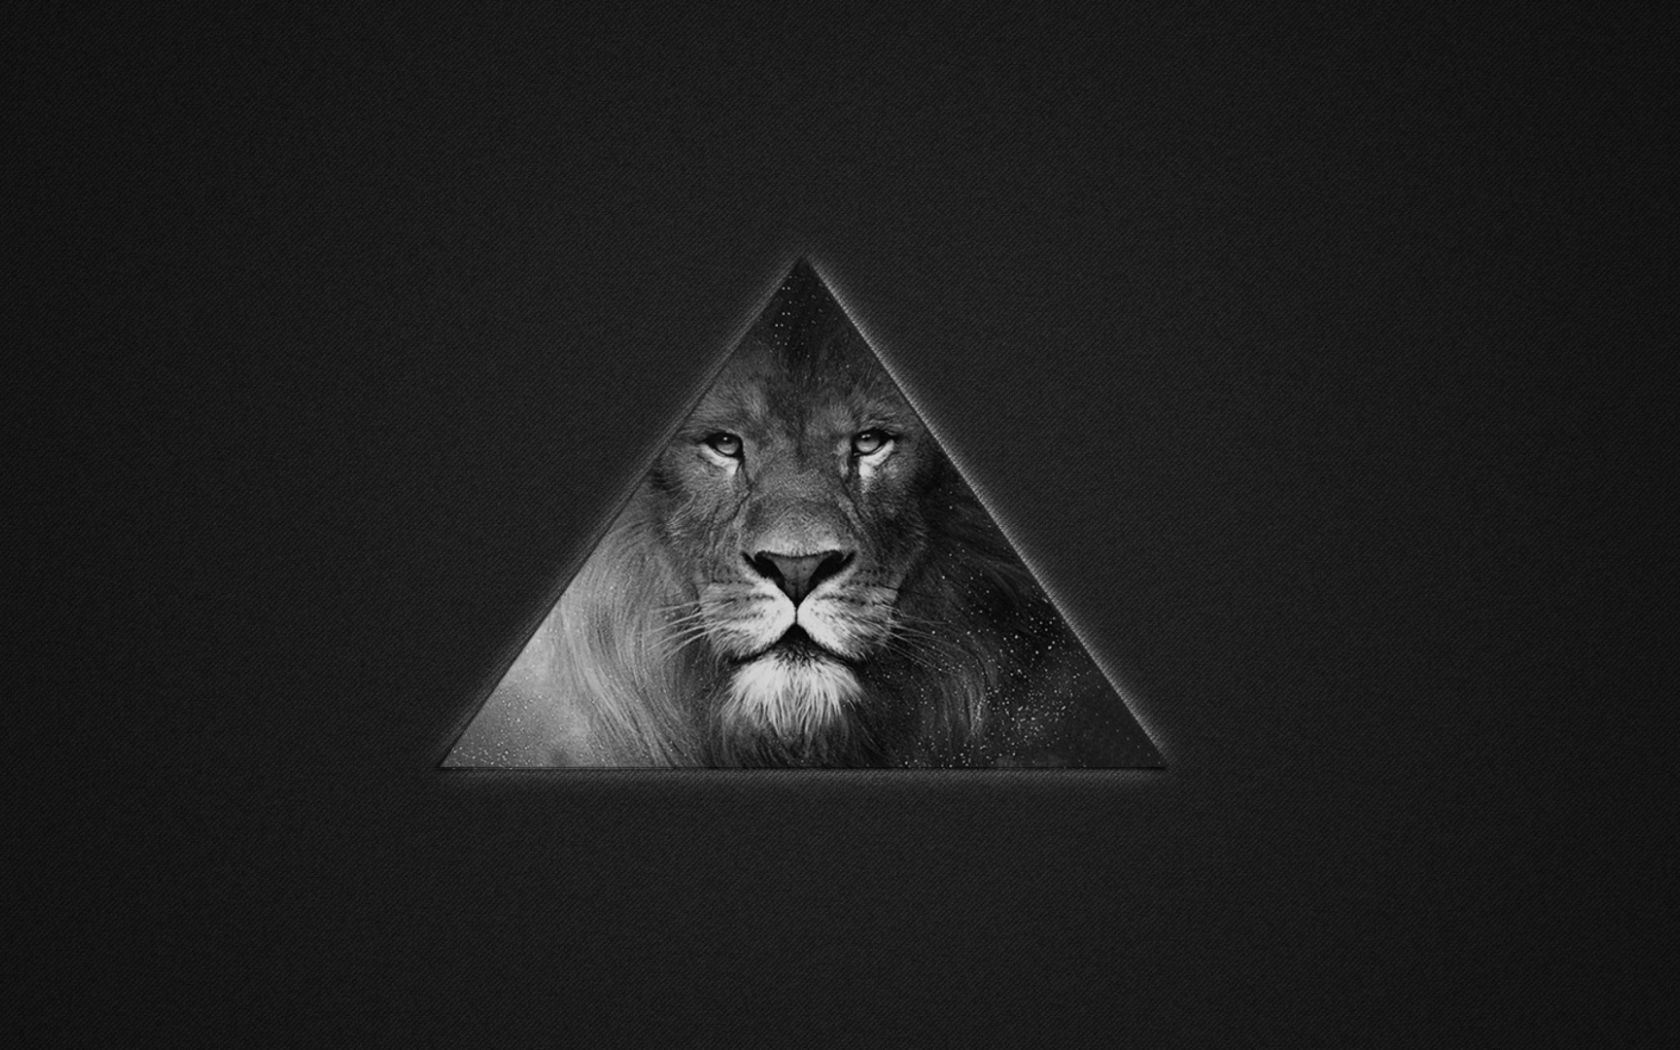 Free download Lions Black And White Triangle Wallpaper for Deskx1080 Full [1920x1080] for your Desktop, Mobile & Tablet. Explore Black and White Lion Wallpaper. White Lion Wallpaper Desktop